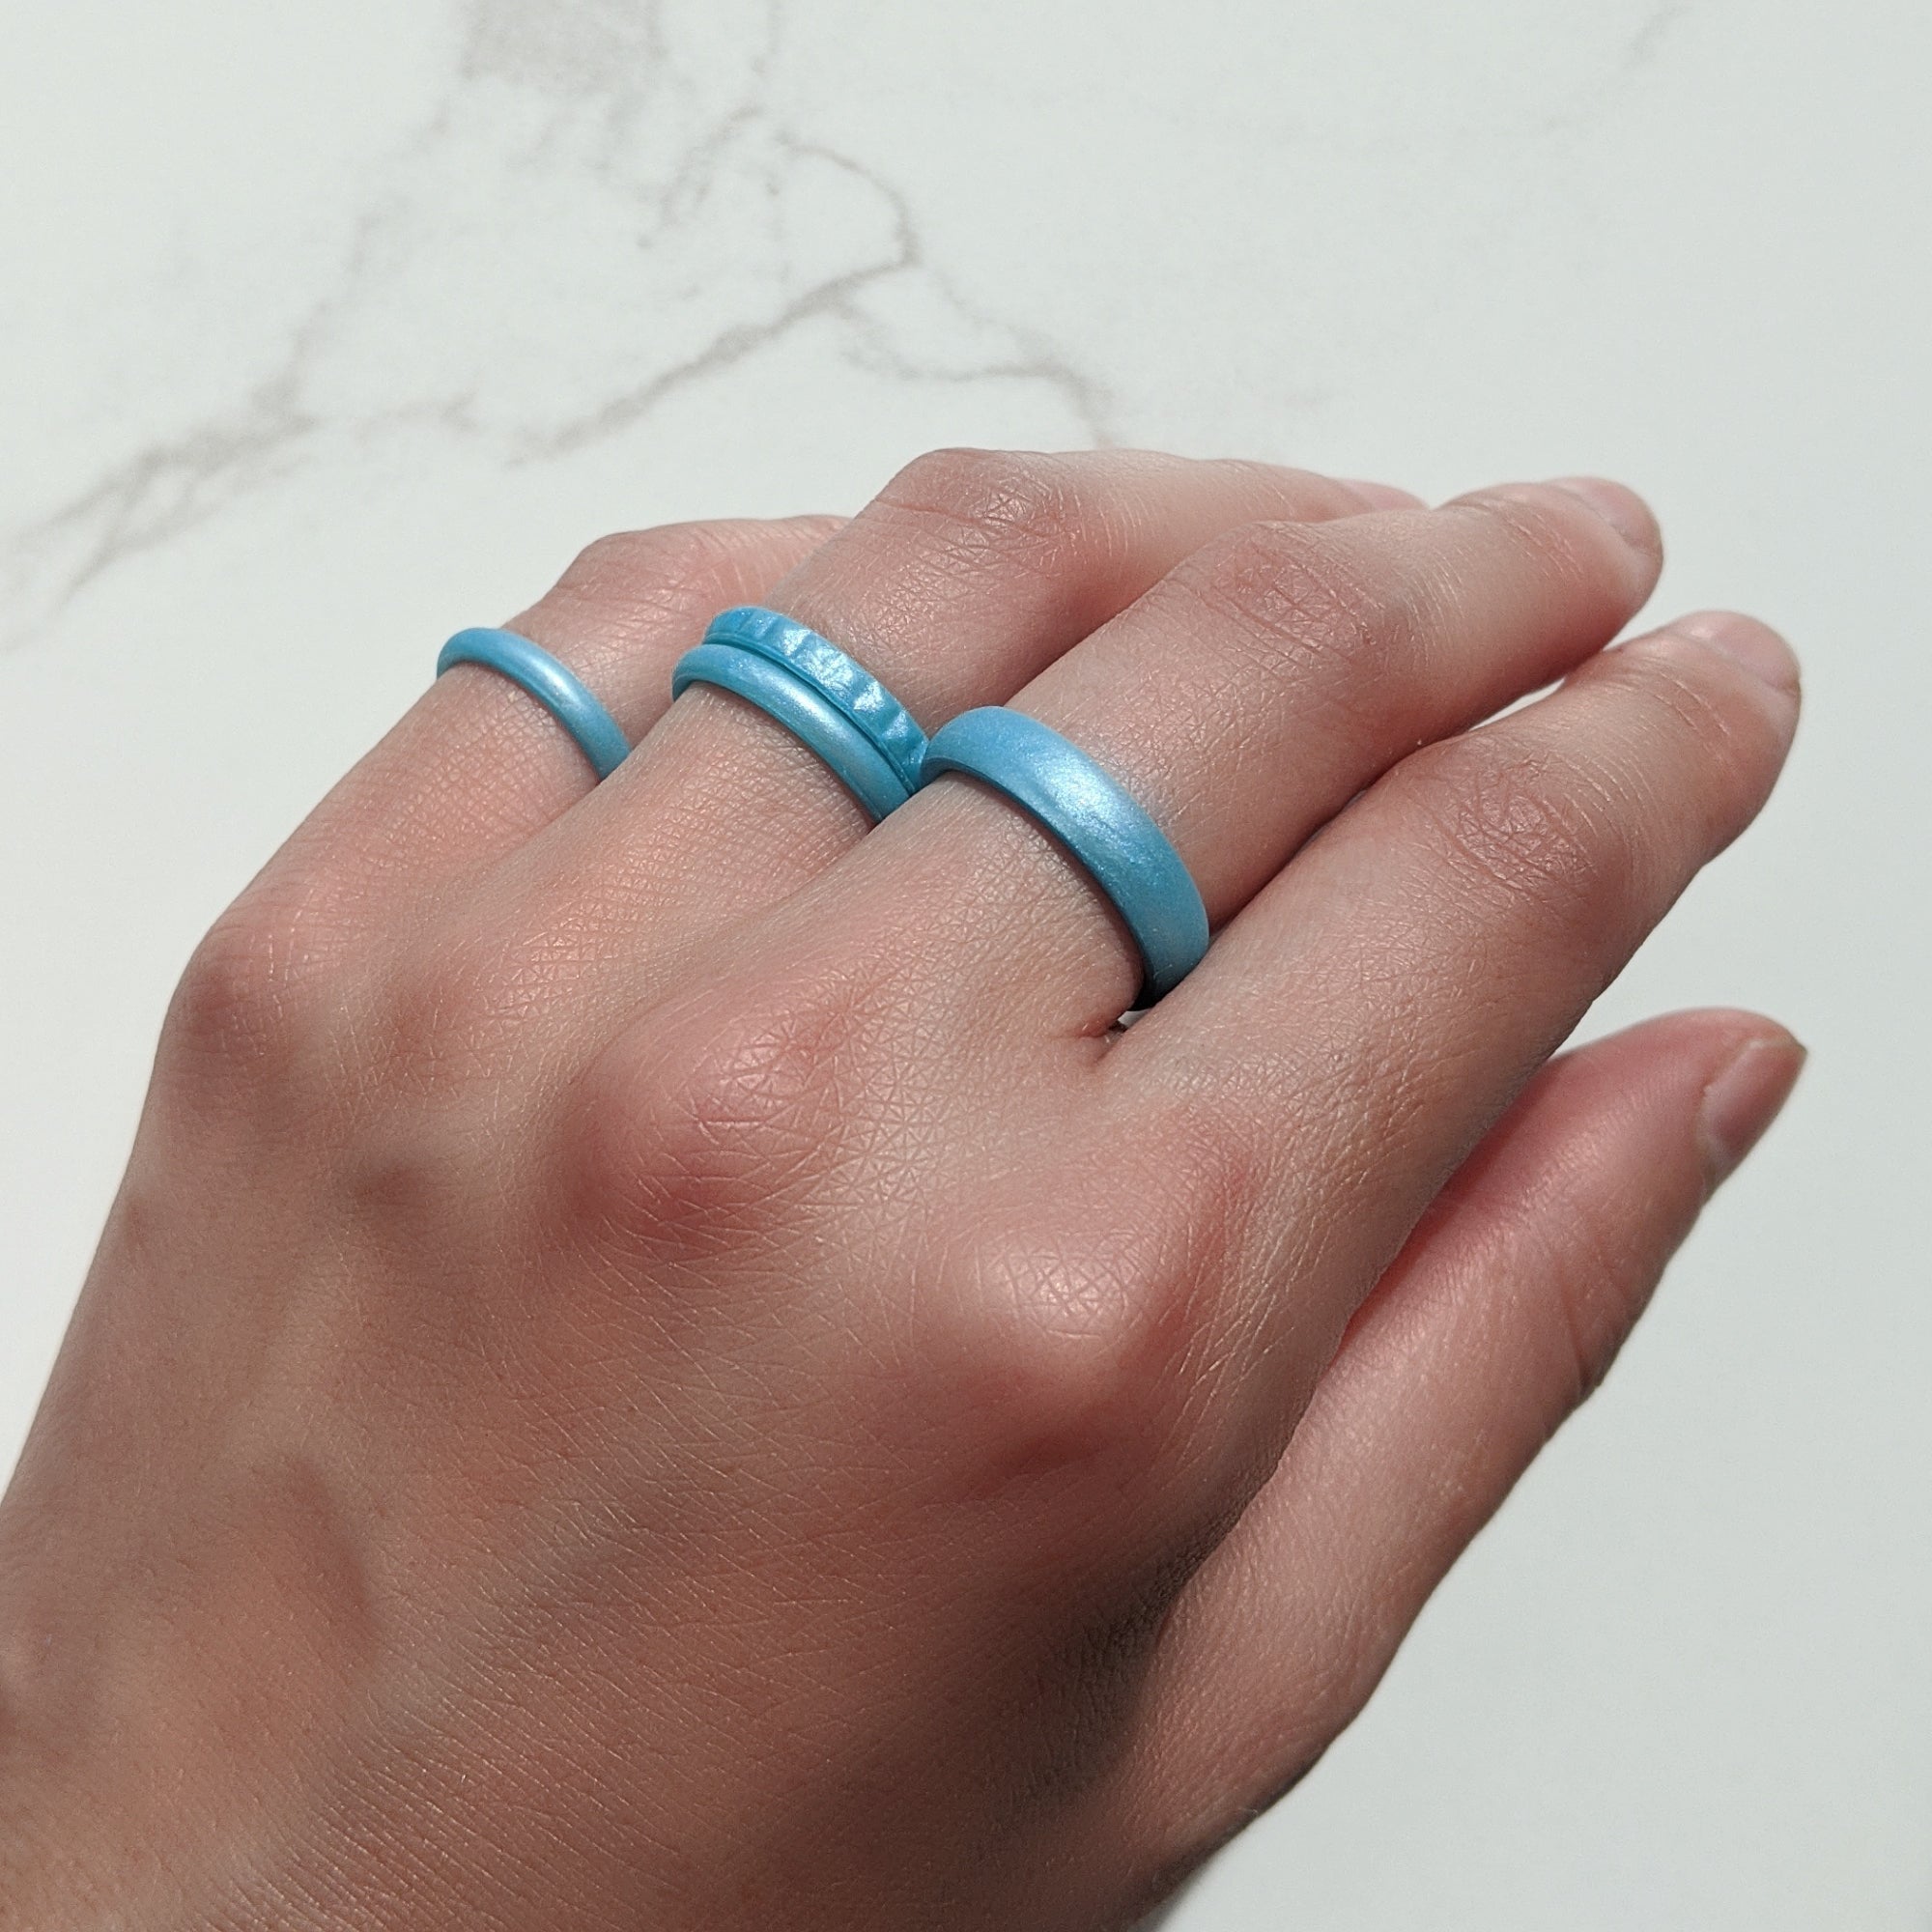 Pearl Baby Blue Sky Stackable Slim Thin Silicone Ring for Women - Knot Theory